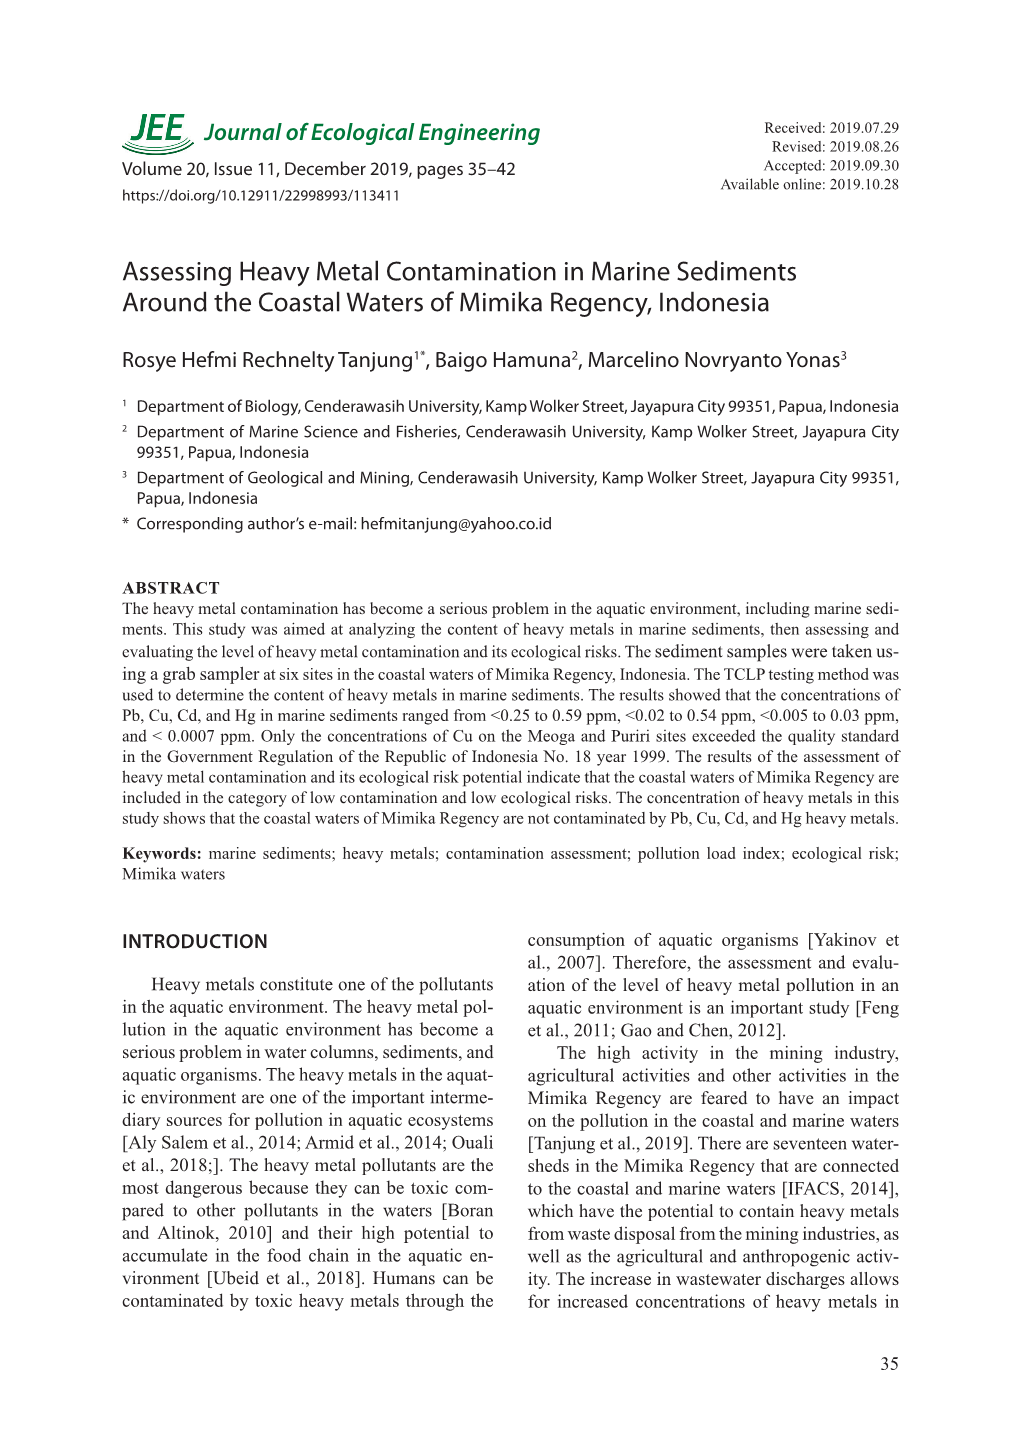 Assessing Heavy Metal Contamination in Marine Sediments Around the Coastal Waters of Mimika Regency, Indonesia